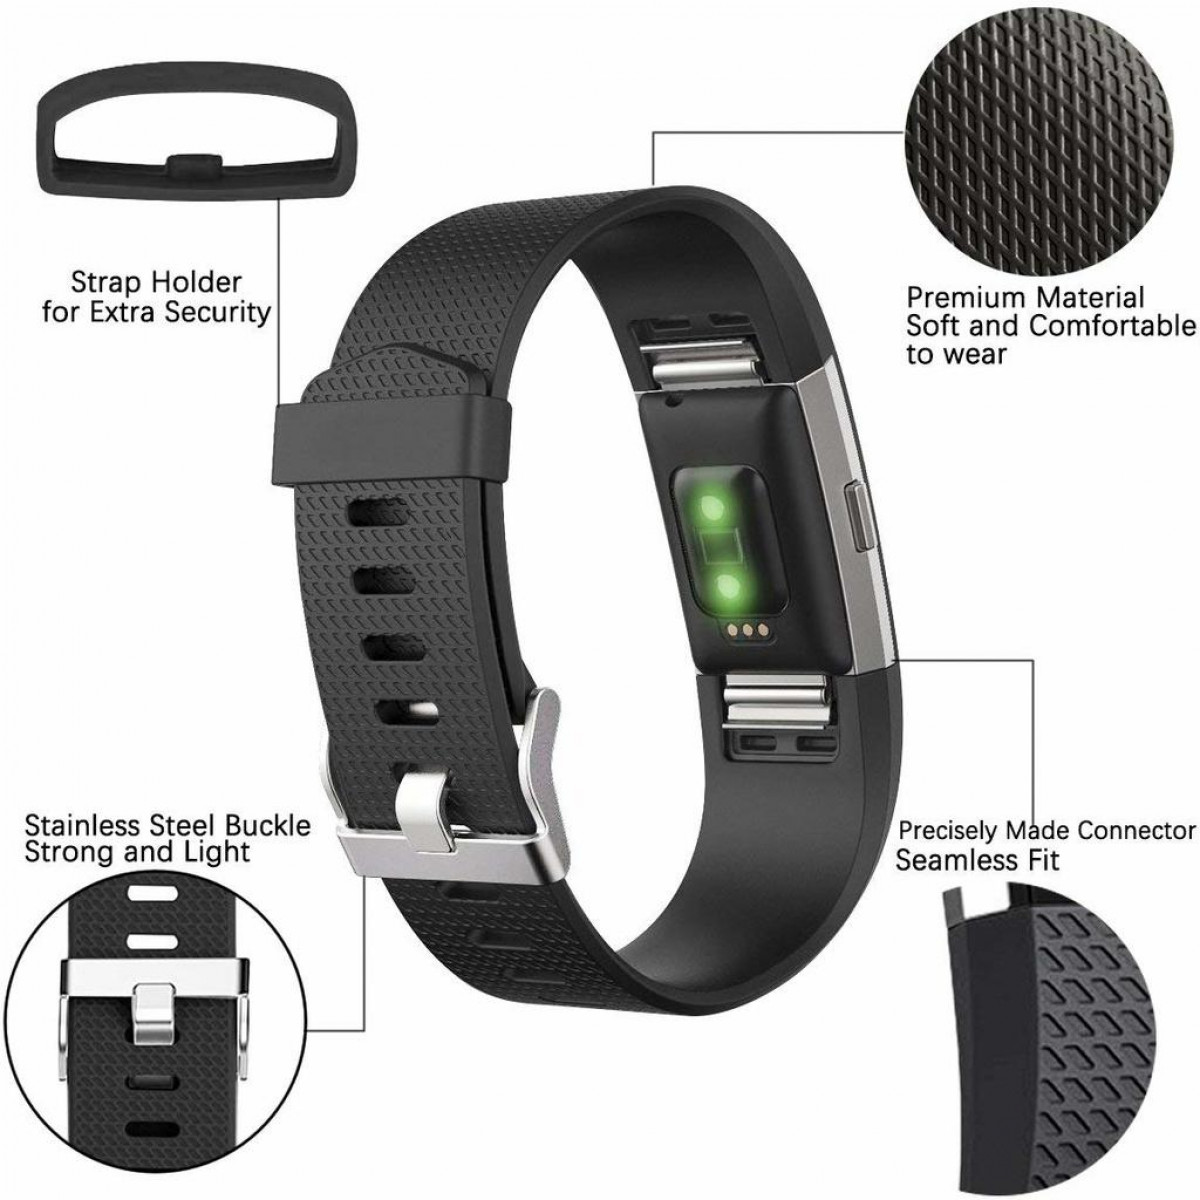 Fitbit (S), Armband Fitbit Charge 3er-Pack 2, (S), Charge Ersatzband, Schwarz INF Fitbit 2 2 Armband schwarz/blau/lila Charge 3er-Pack